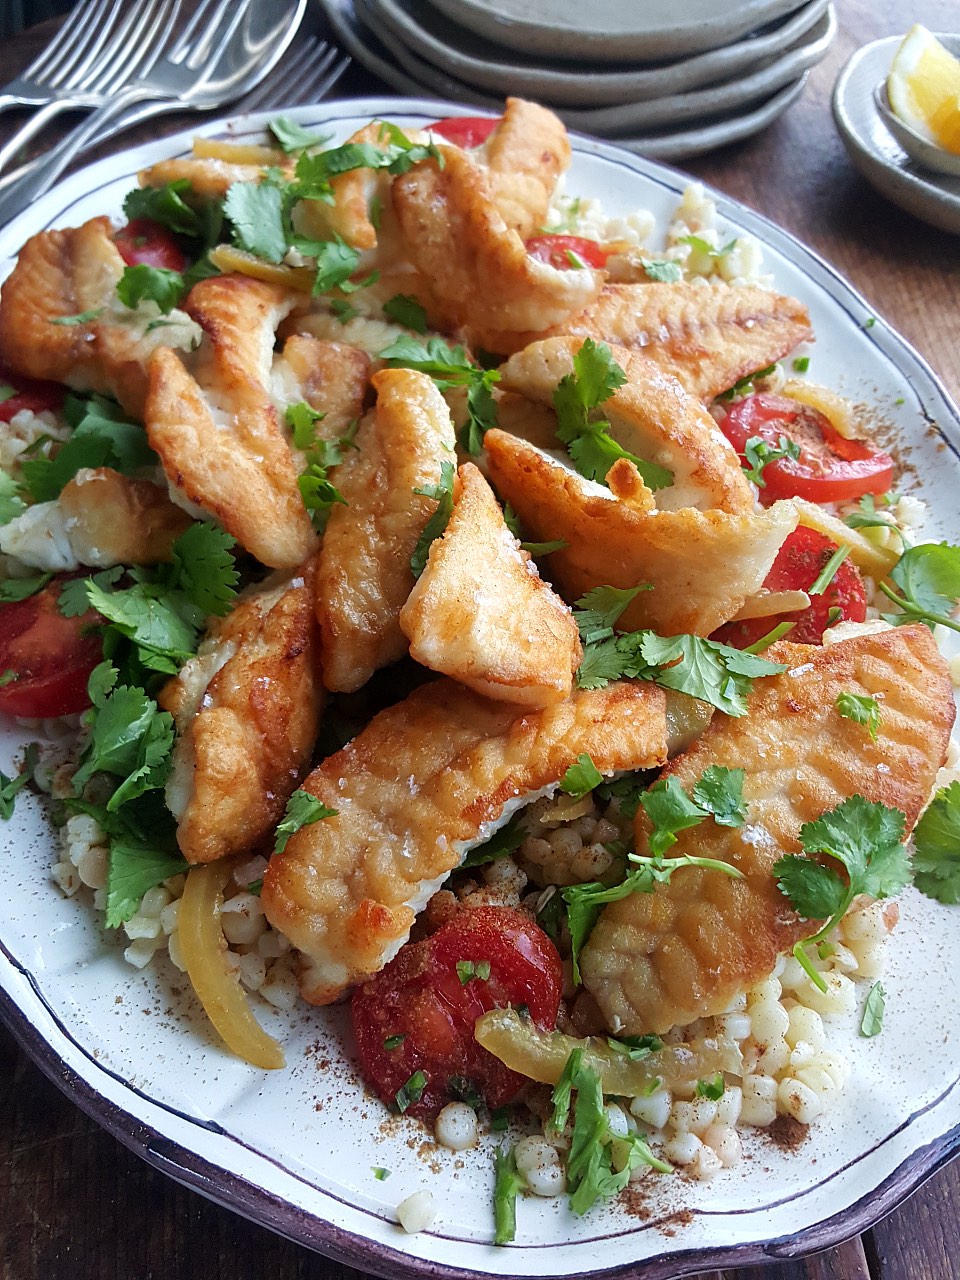 Pan-fried Fish with Spiced Tomatoes & Couscous